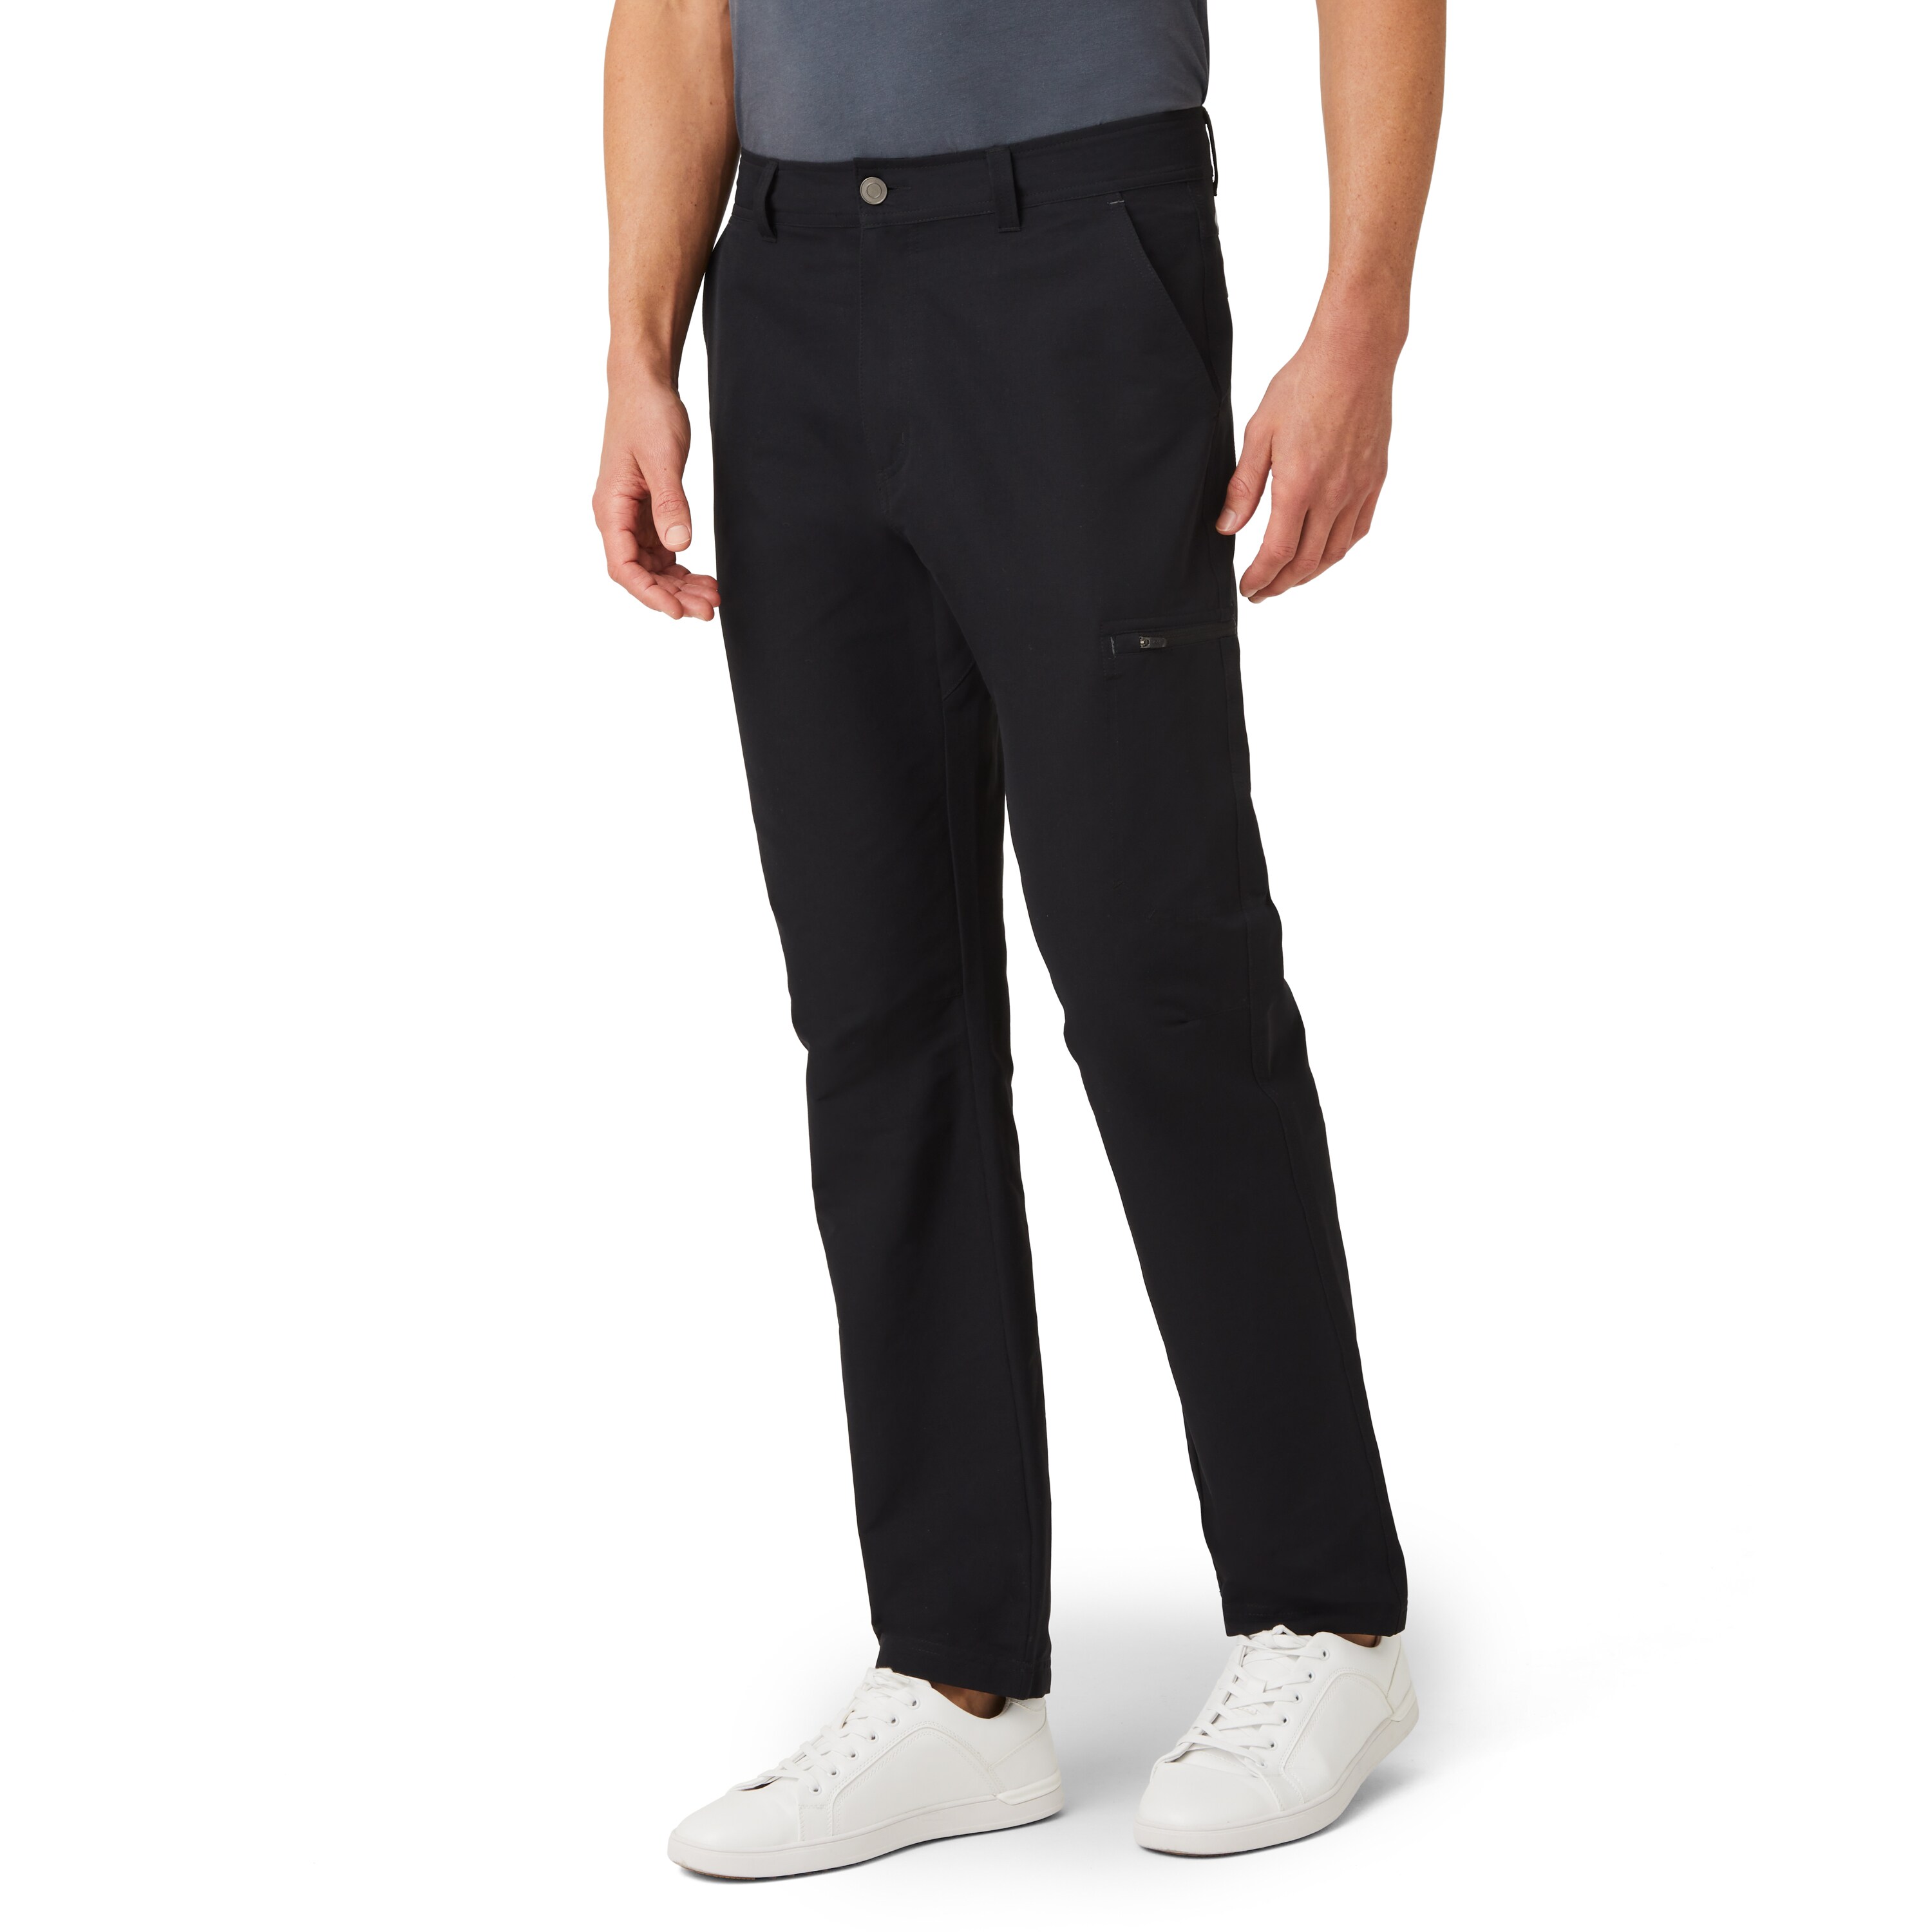 Work Pants at Lowes.com